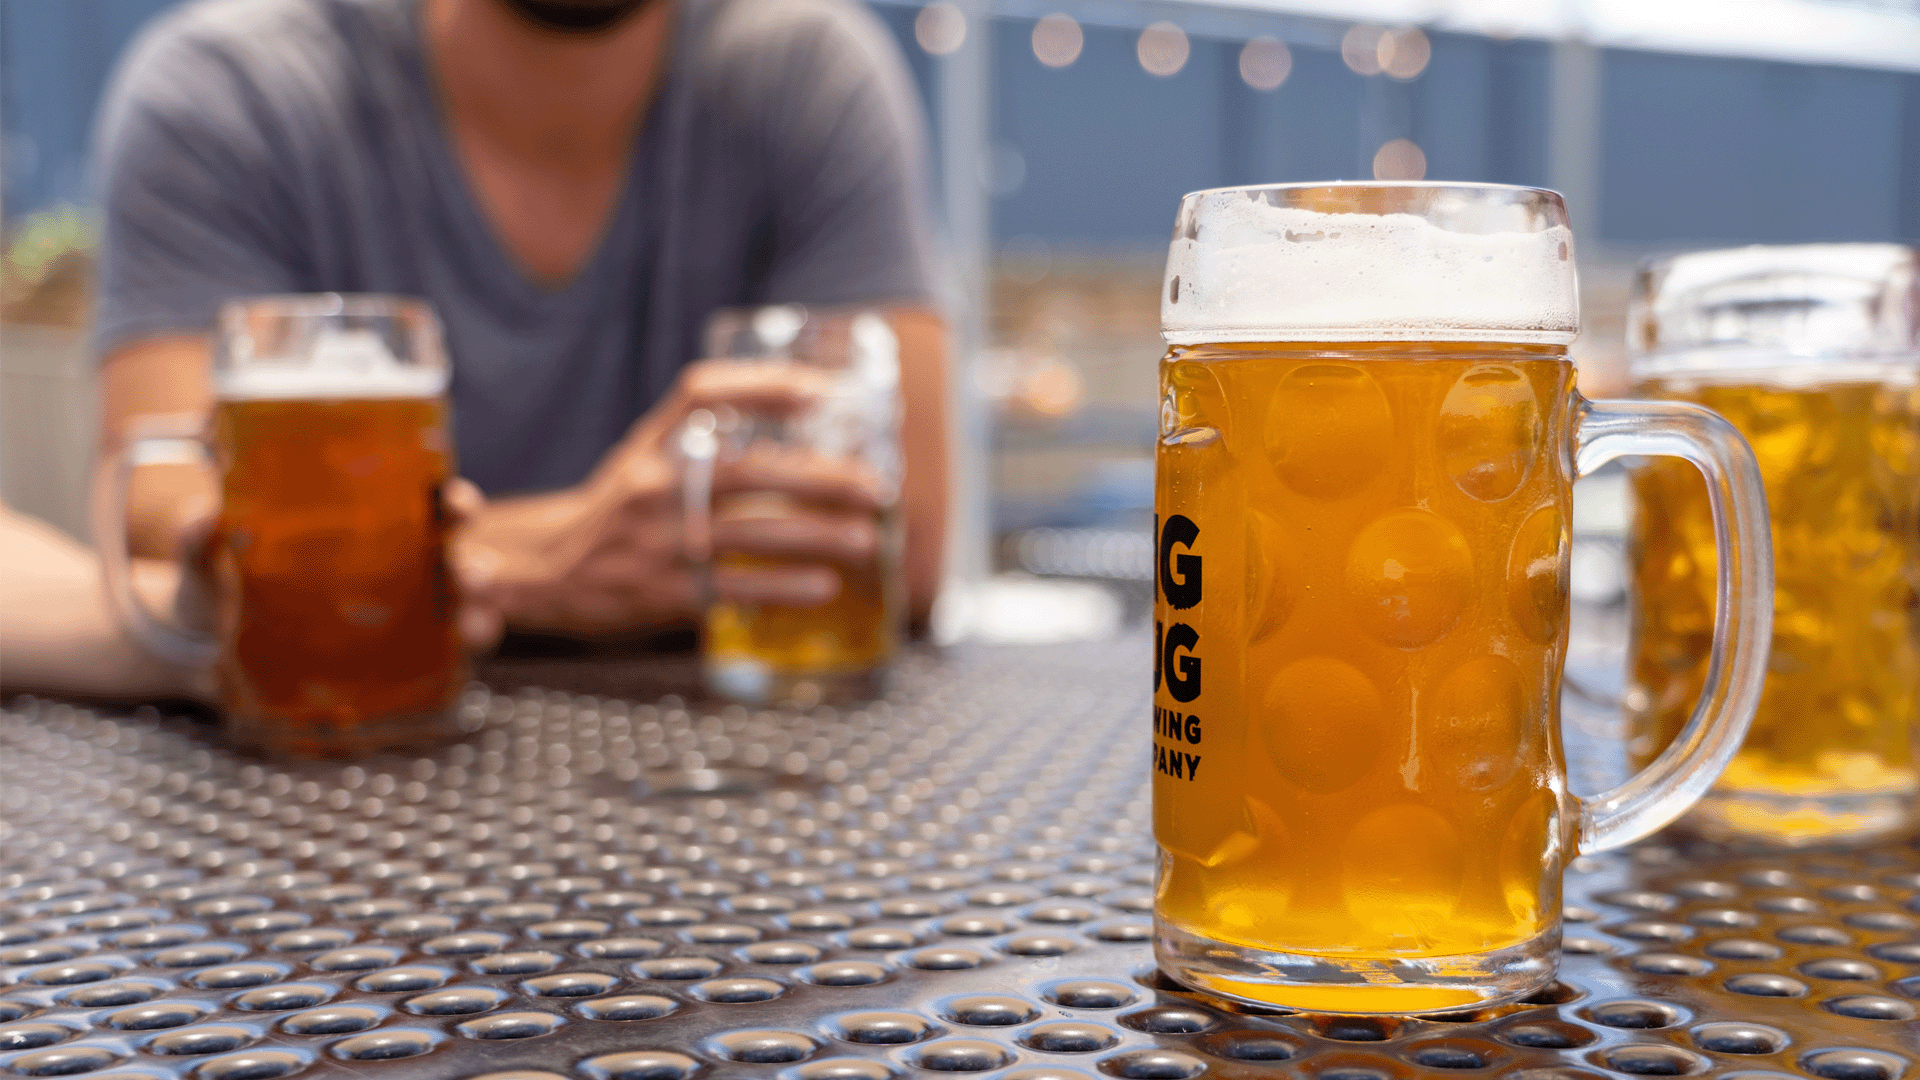 8 Unique Beer Gardens You Need To Visit This Fall